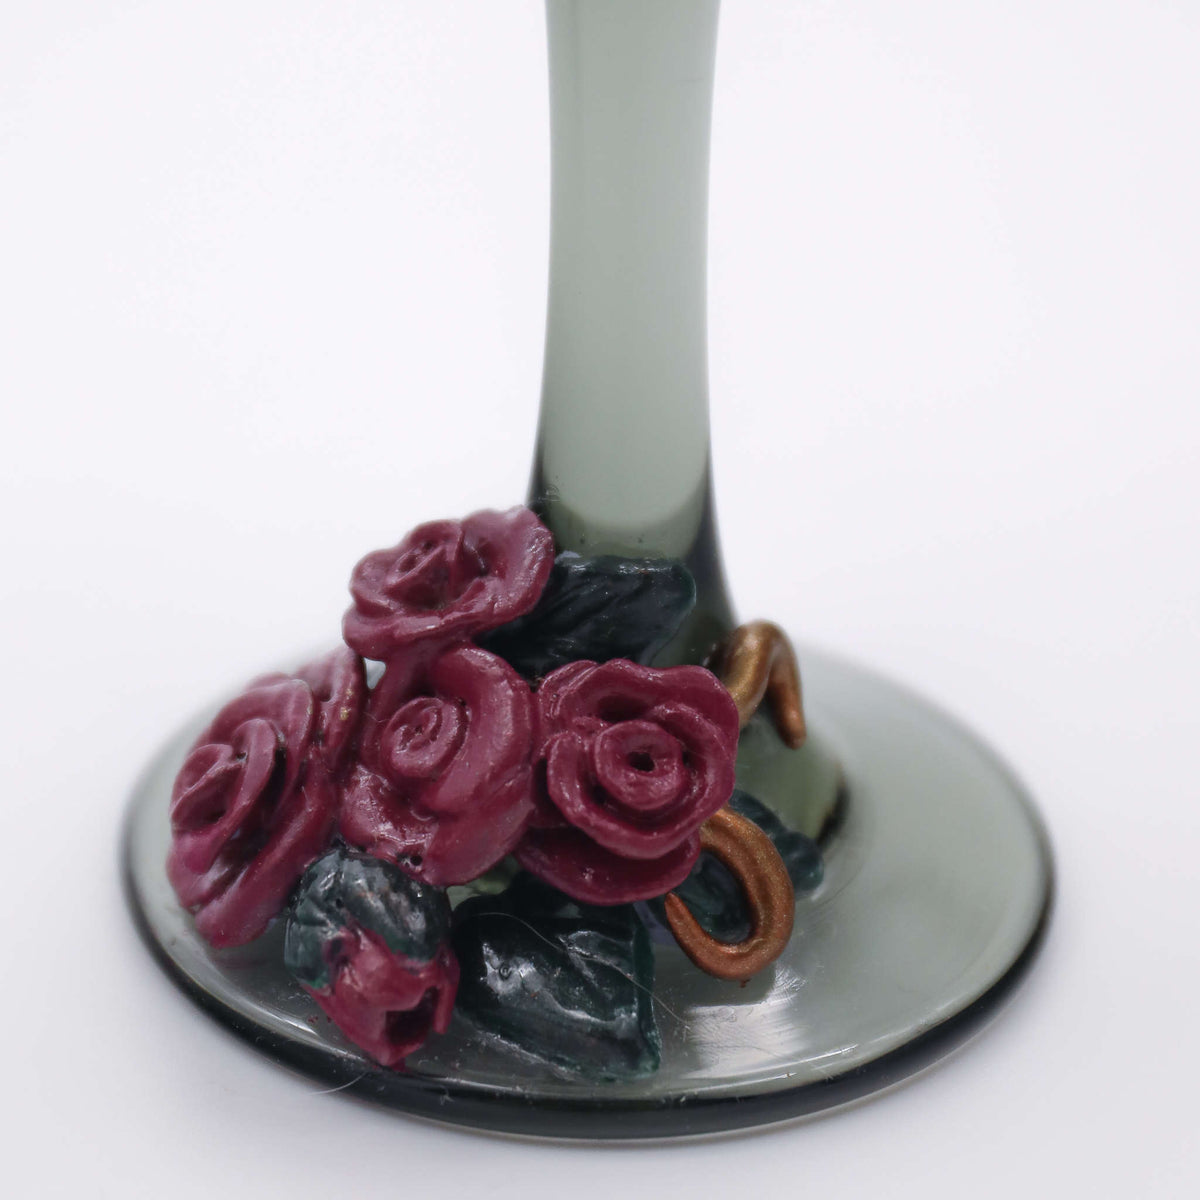 Bring the classic Victorian era to your wedding day or anniversary celebration. Each black-tinted glass is hand-scuplted with burgundy roses laid within a metal-inspired polymer and clay pattern.